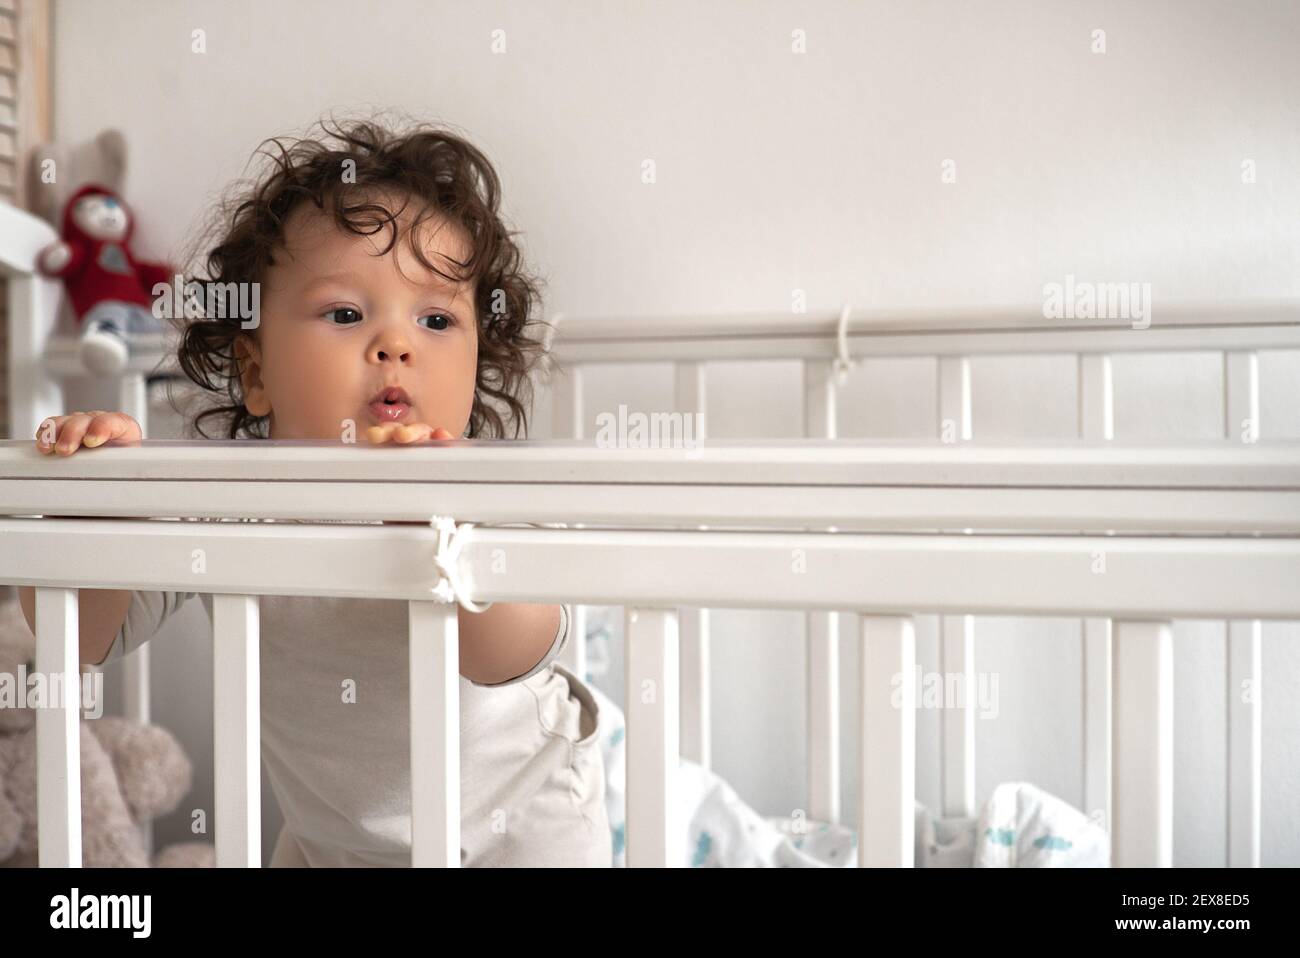 Portrait of a little cute pensive nursing toddler standing in a crib looking at forward. Stock Photo